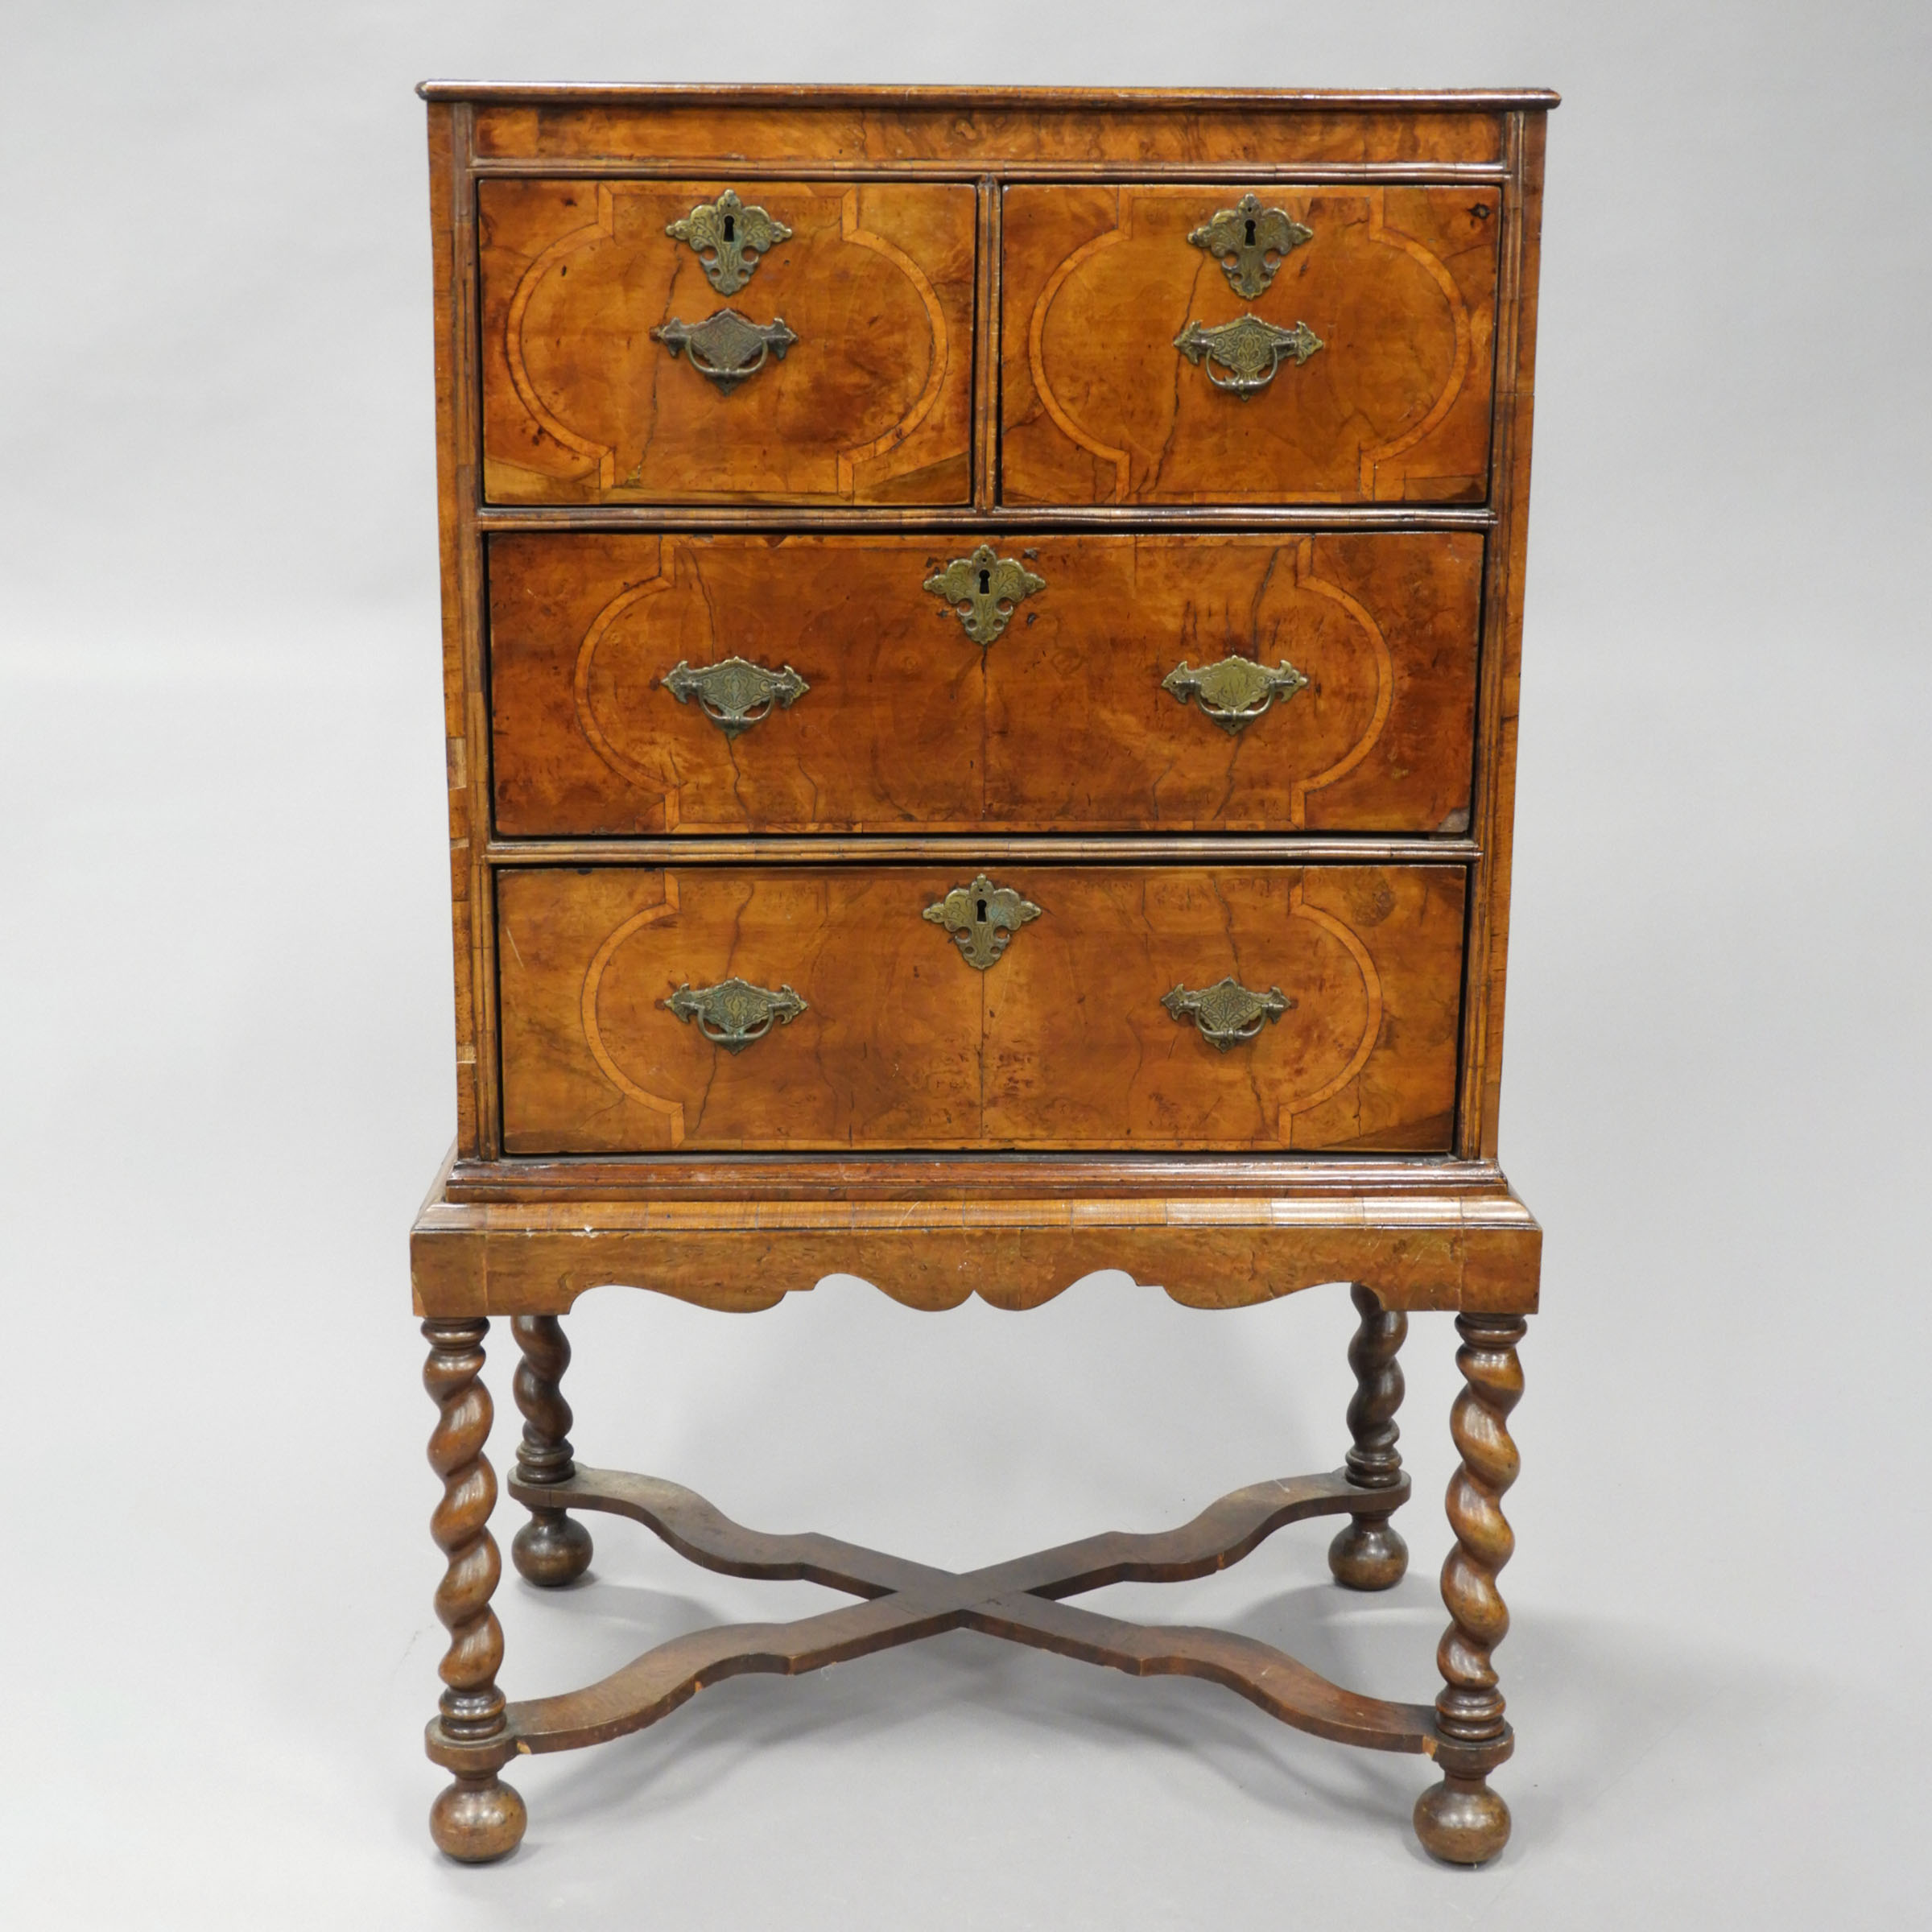 Small William and Mary Inlaid Figured Walnut Chest on Stand, early 18th century